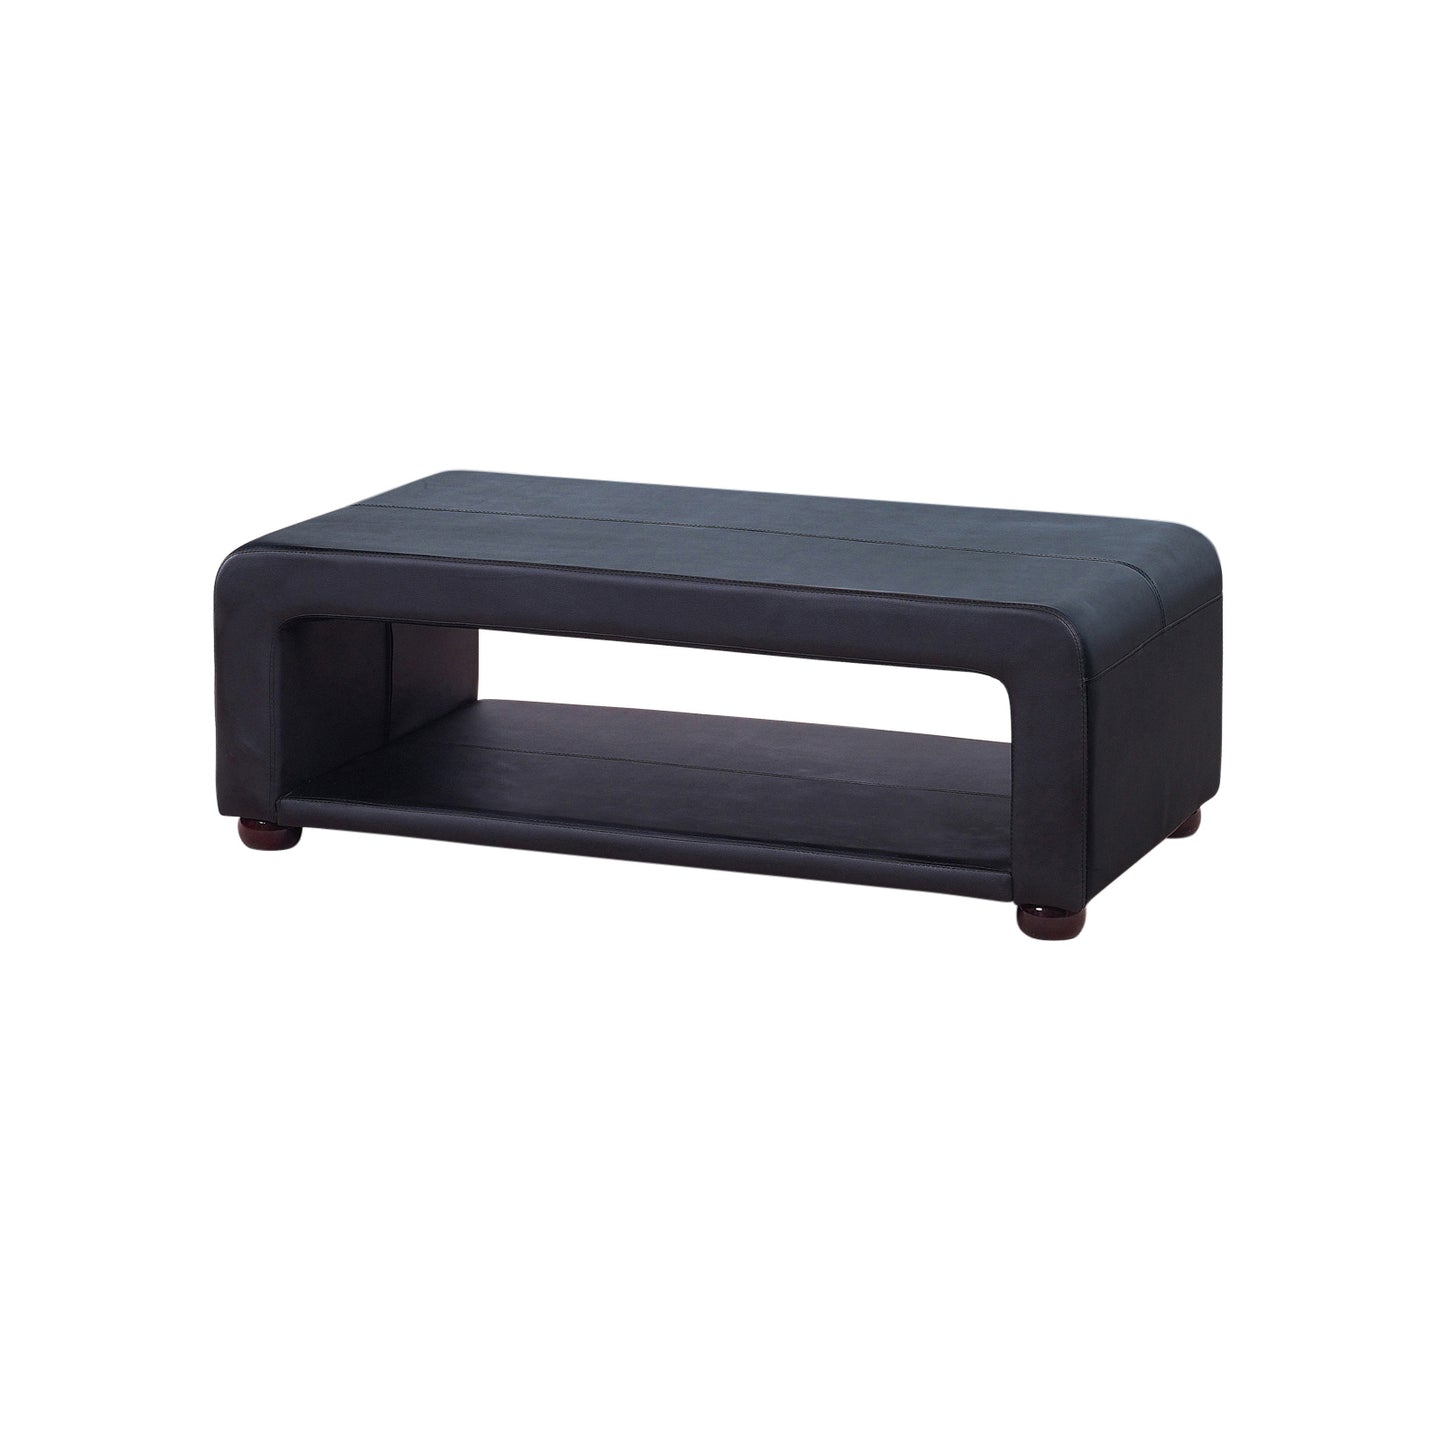 Coffee Table Upholstered PU Leather in Black Colour with open storage - image2